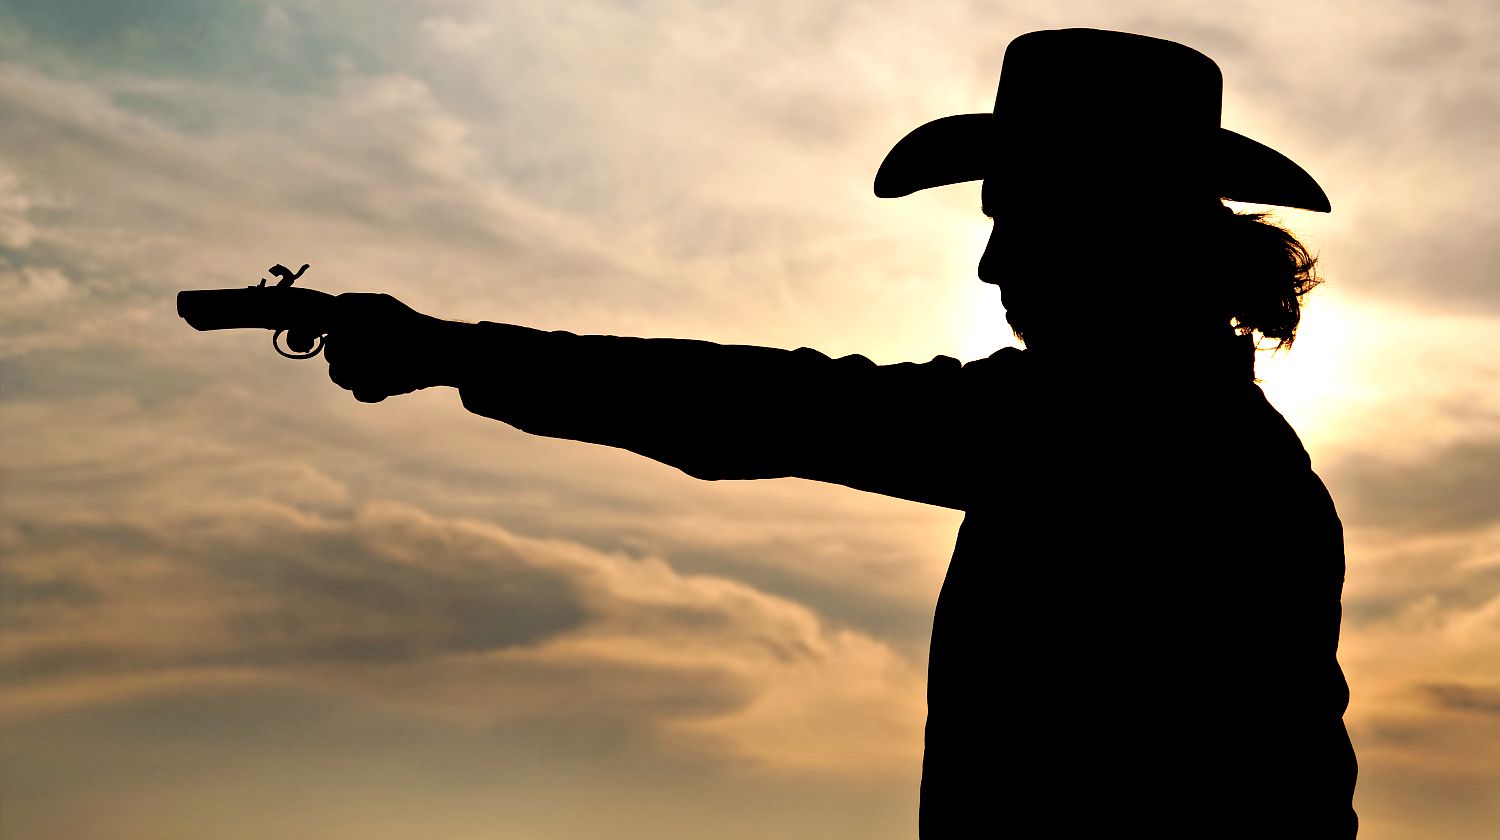 Feature| Silhouette of a young man in a cowboy hat shooting an antique hand gun | Lessons On Gunfighting From Wyatt Earp